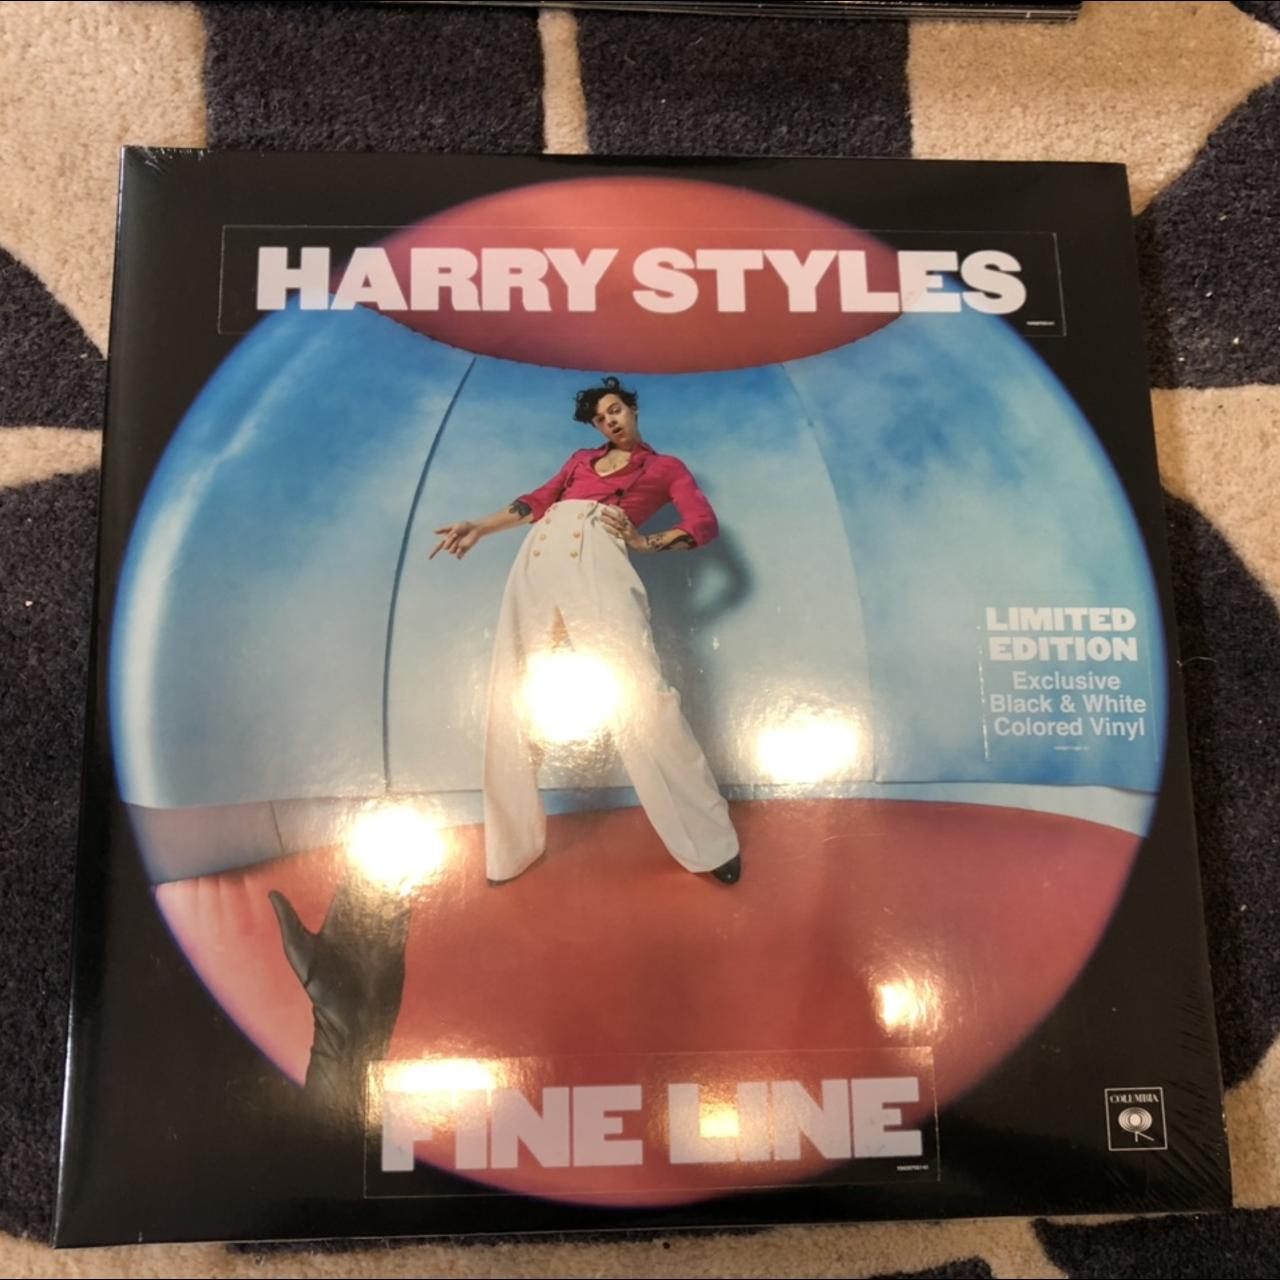 HARRY STYLES: Fine Line Exclusive Limited Edition Black/White